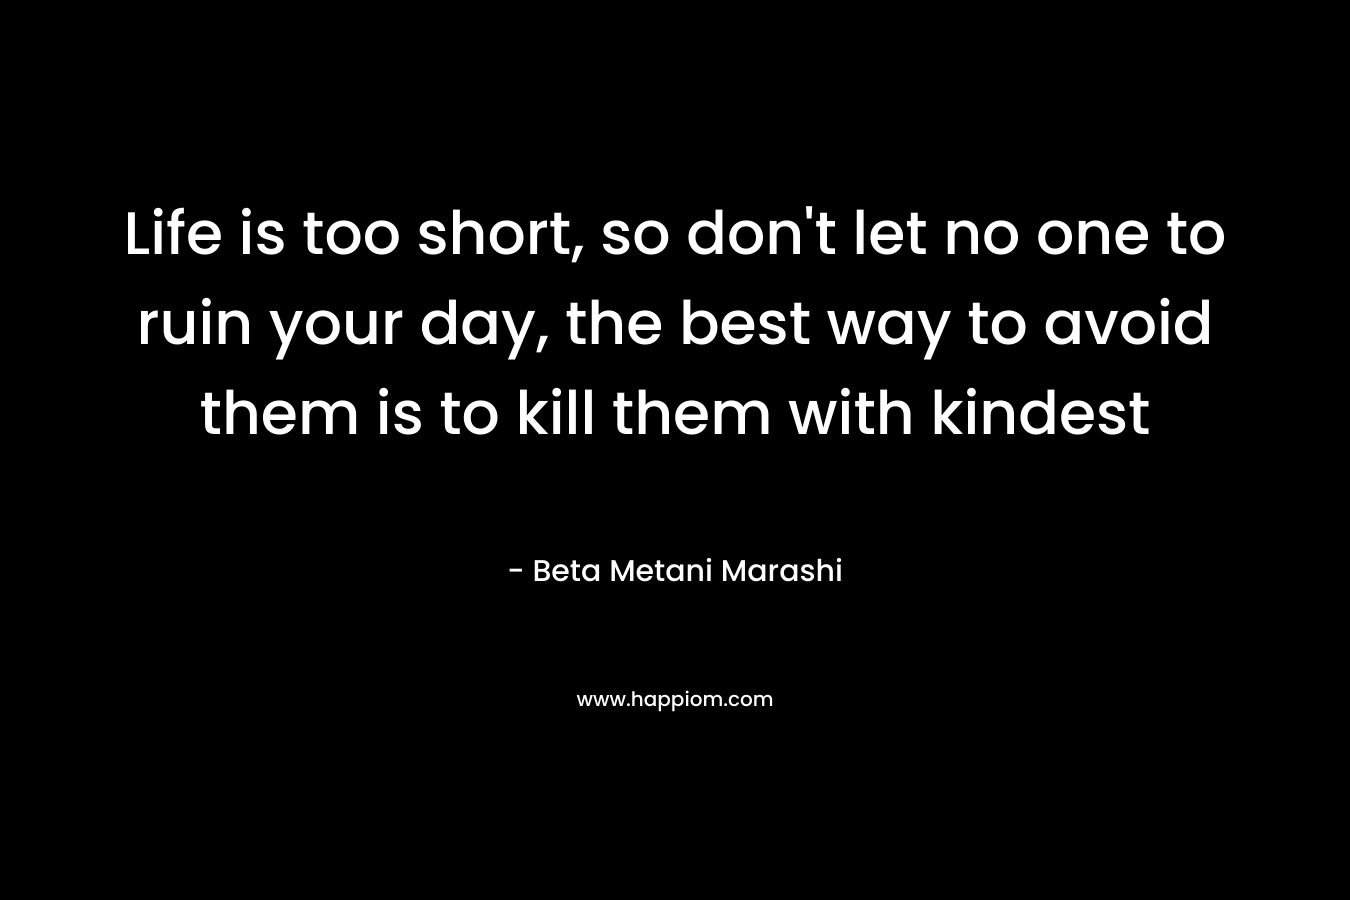 Life is too short, so don't let no one to ruin your day, the best way to avoid them is to kill them with kindest